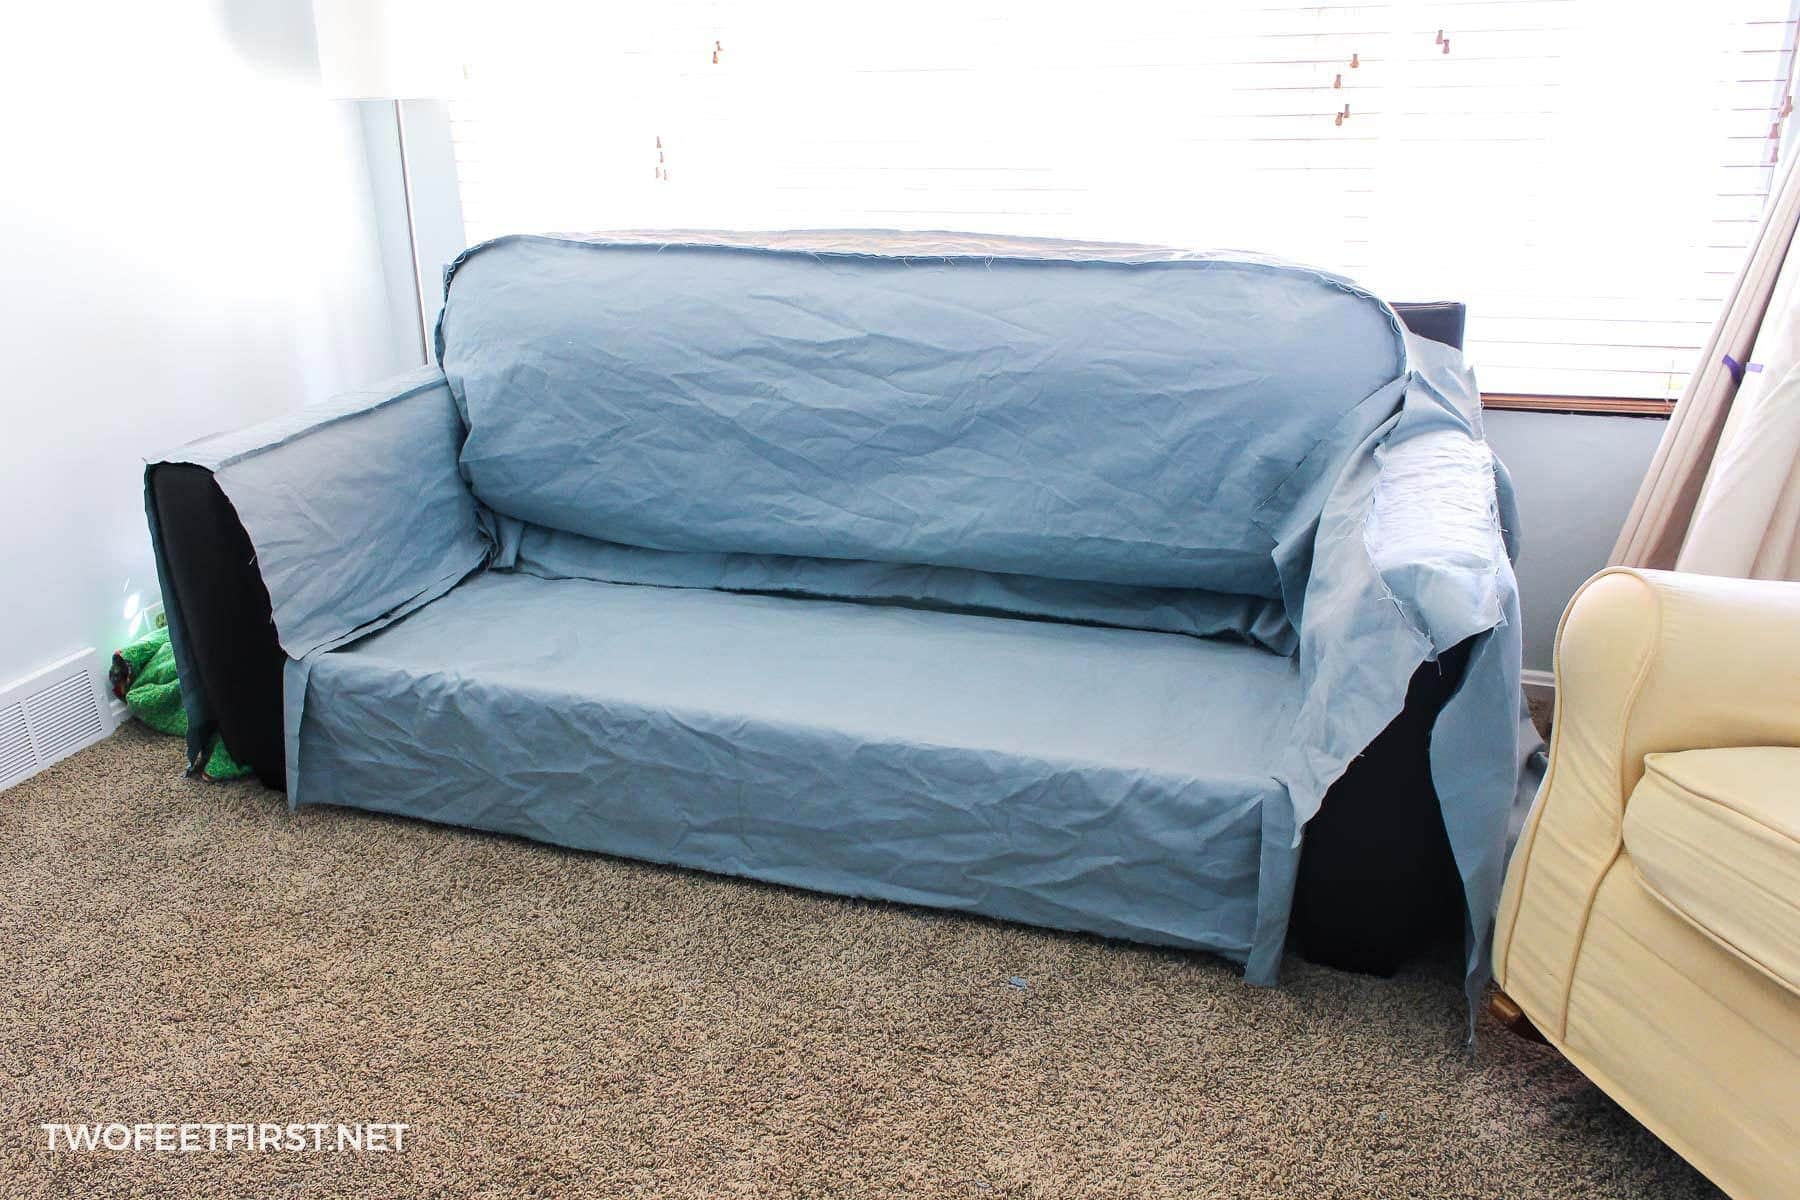 Make Slipcover For A Sofa Diy Couch Cover, How To Make A Sofa Slipcover With Sheets